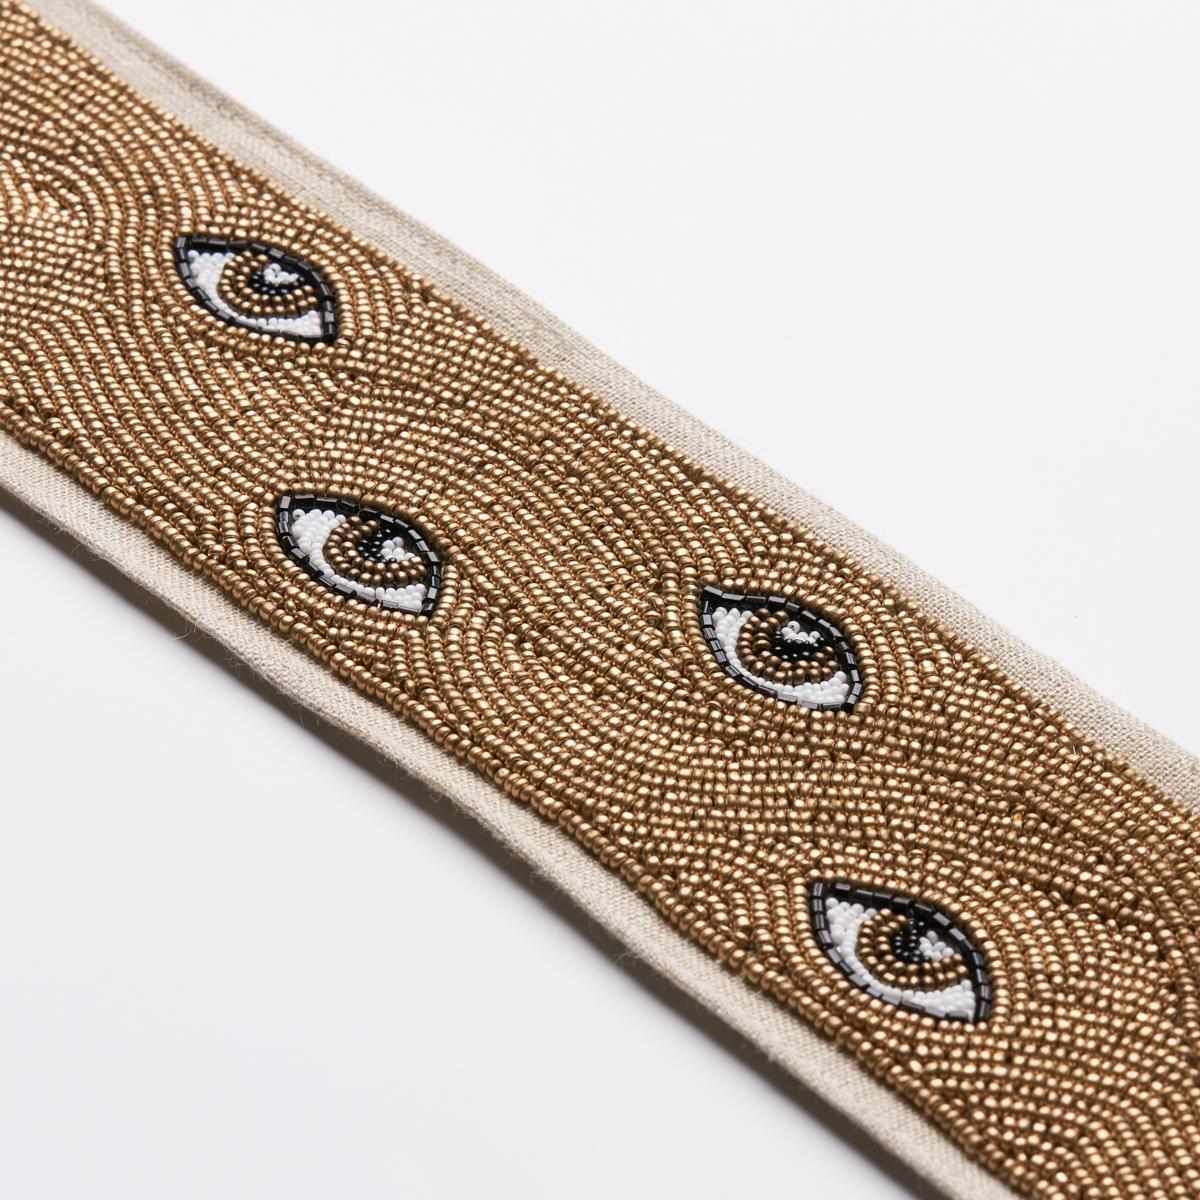 MIND'S EYE BEADED TAPE_BROWN & GOLD